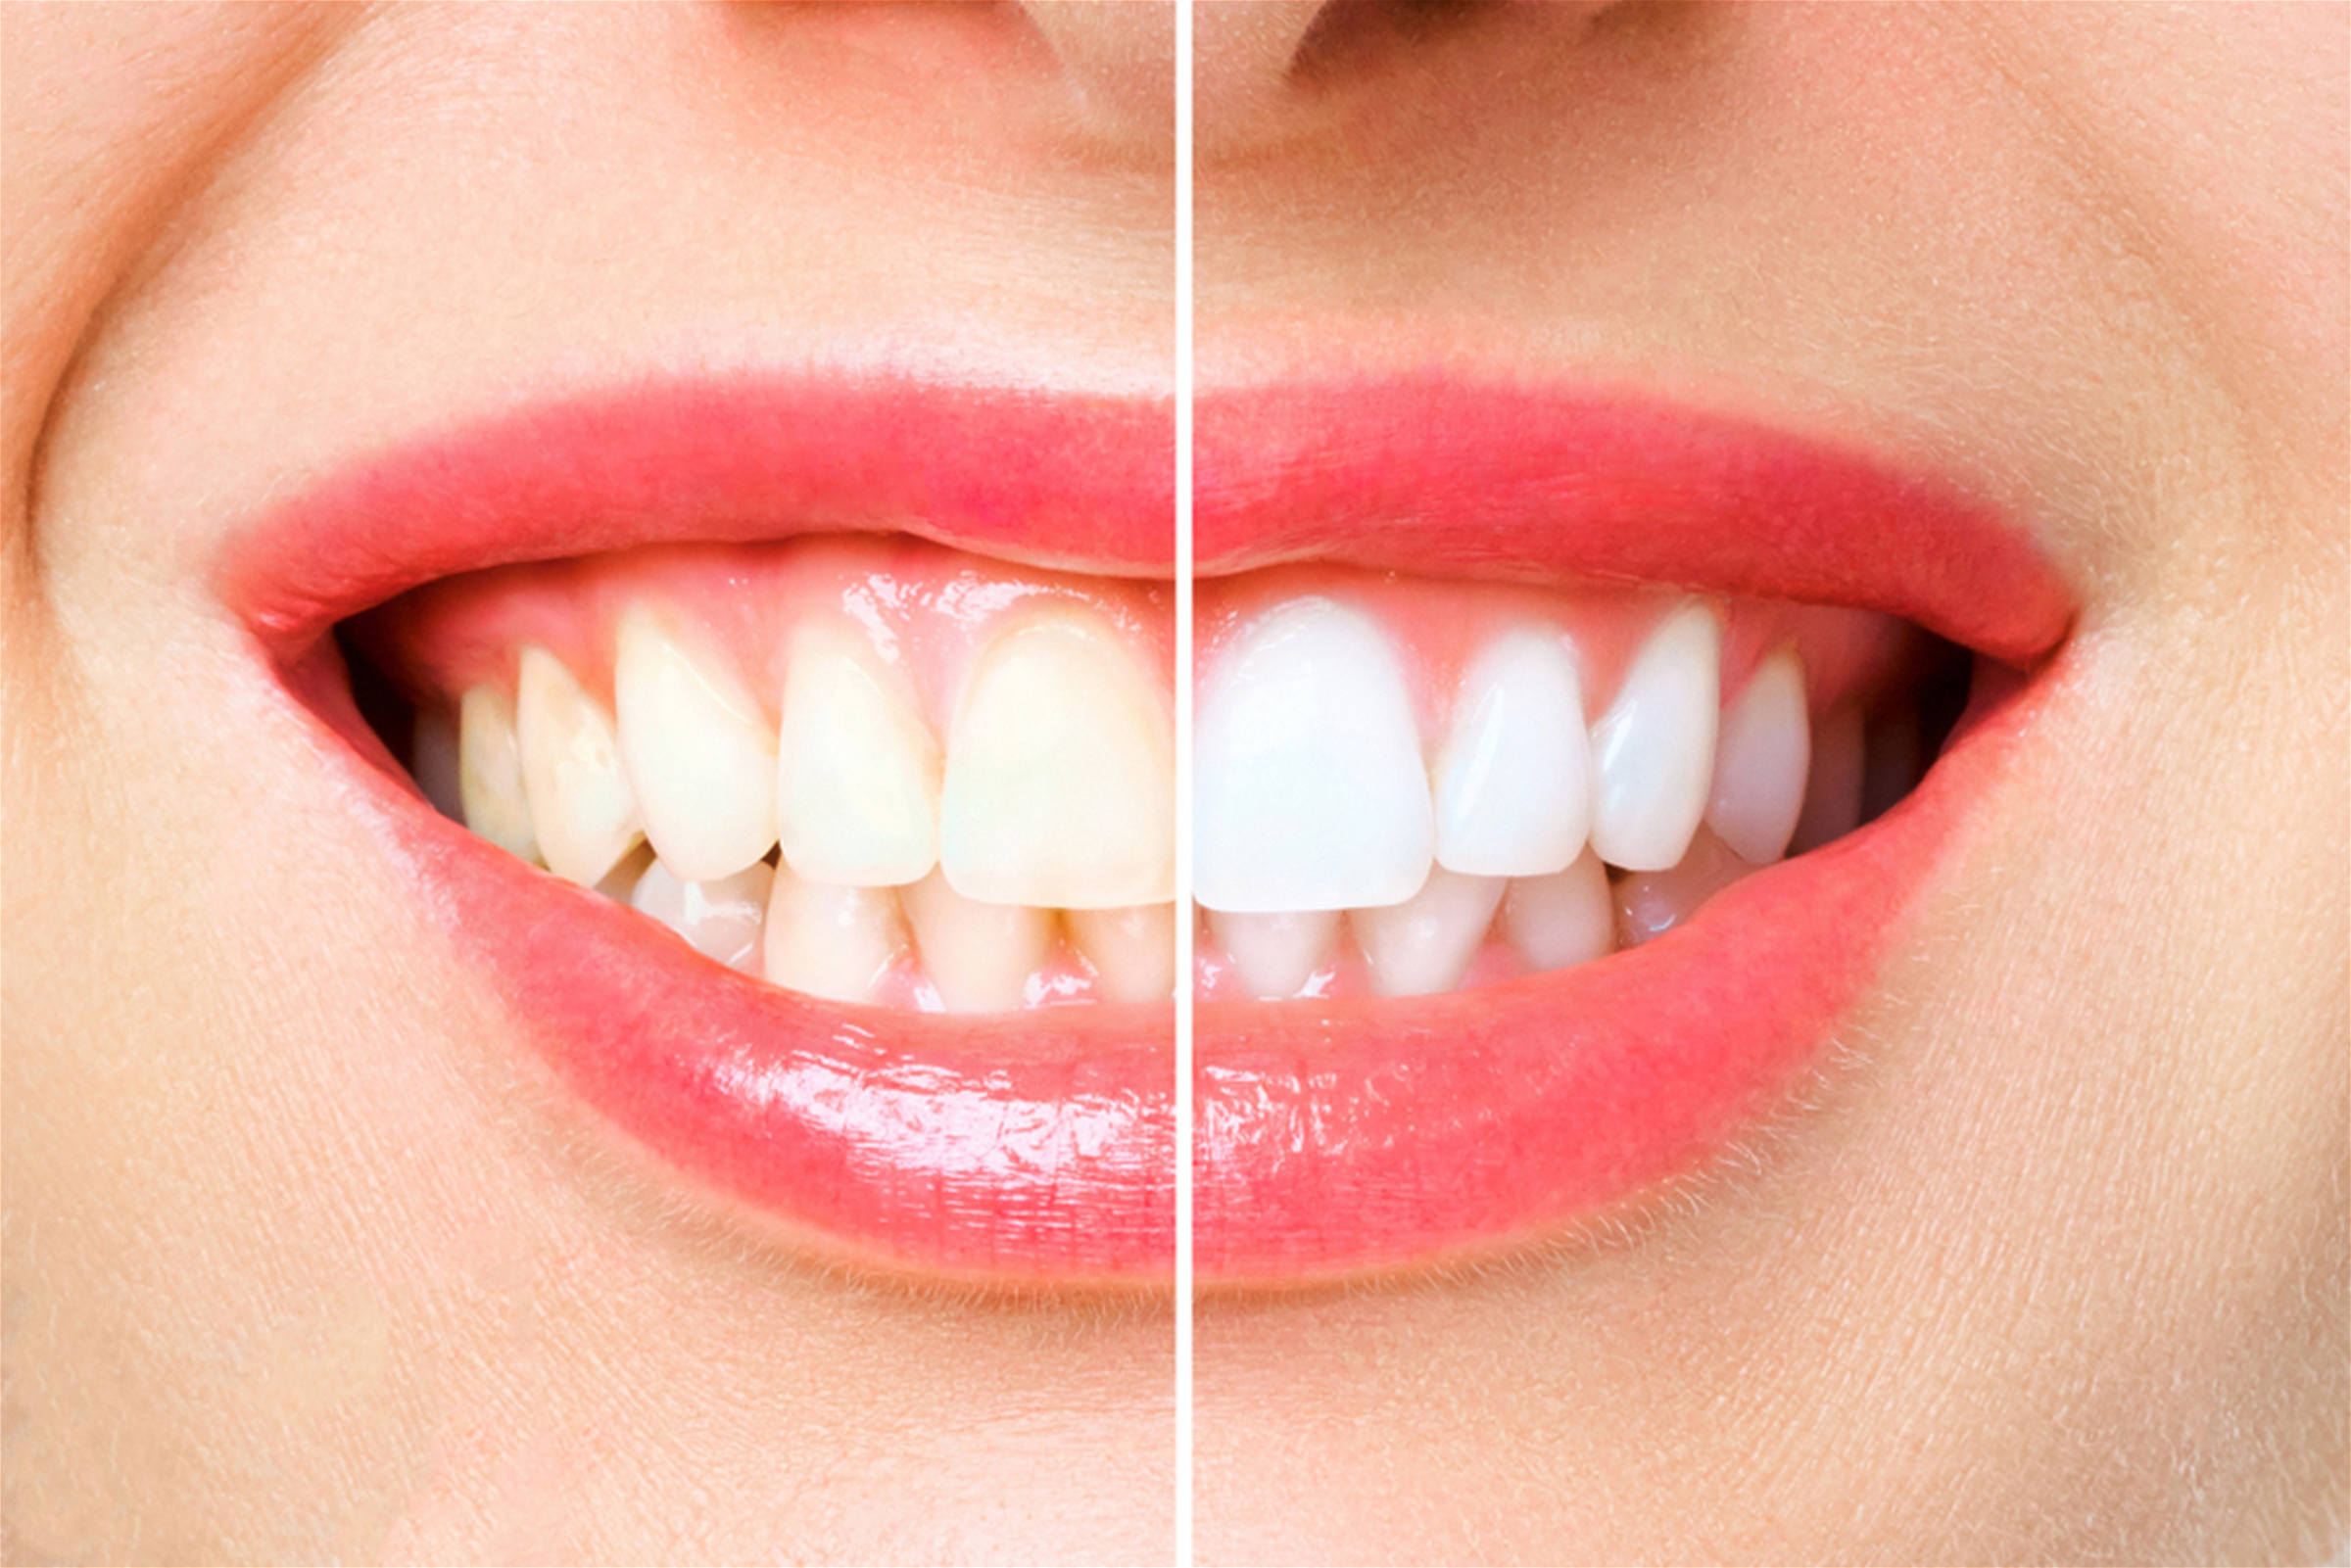 is teeth whitening safe find out how it is done